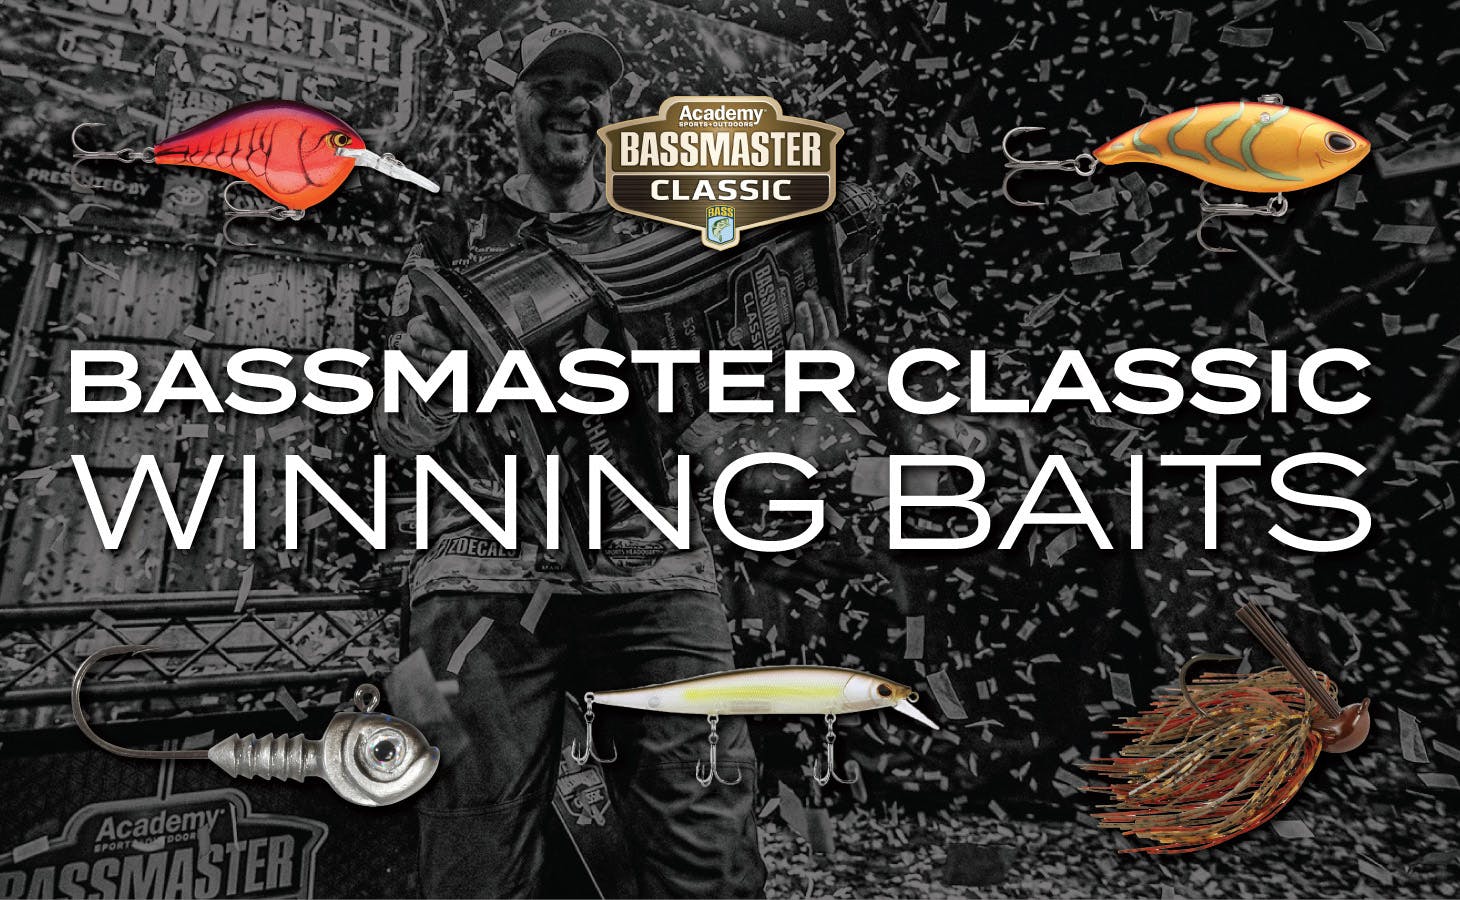 Tips for organizing your tackle today - Bassmaster